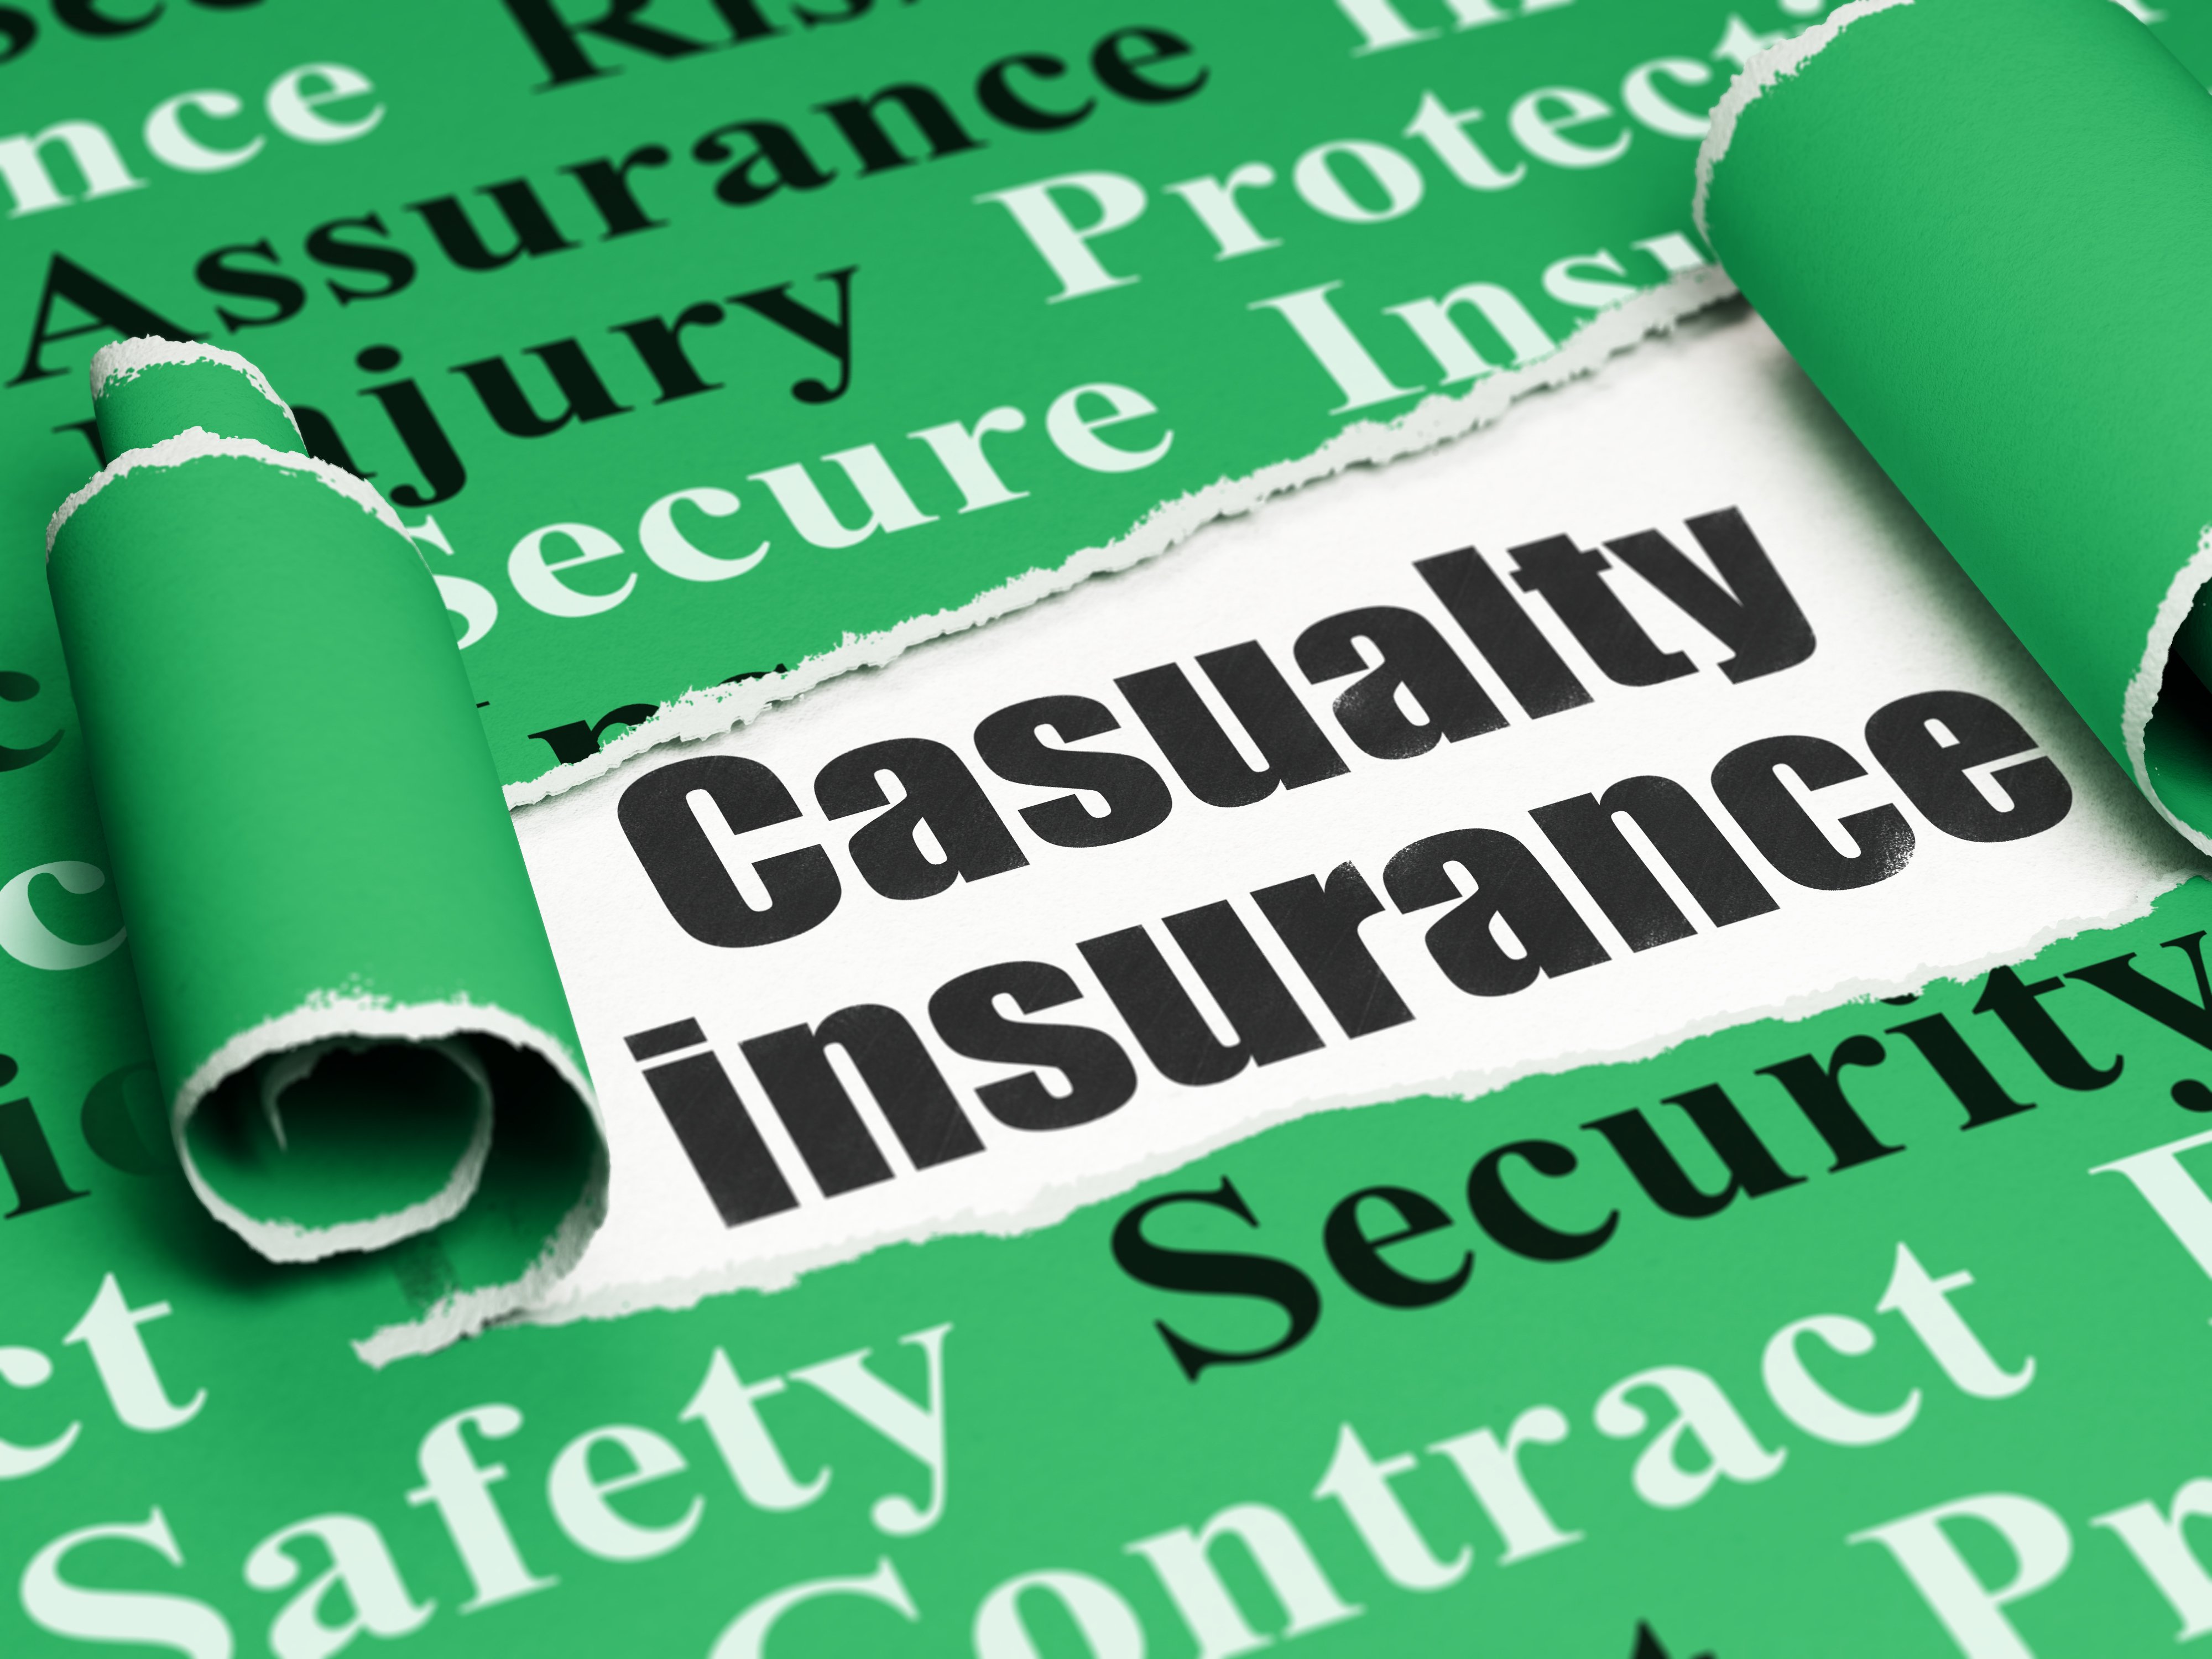 Casualty insurance